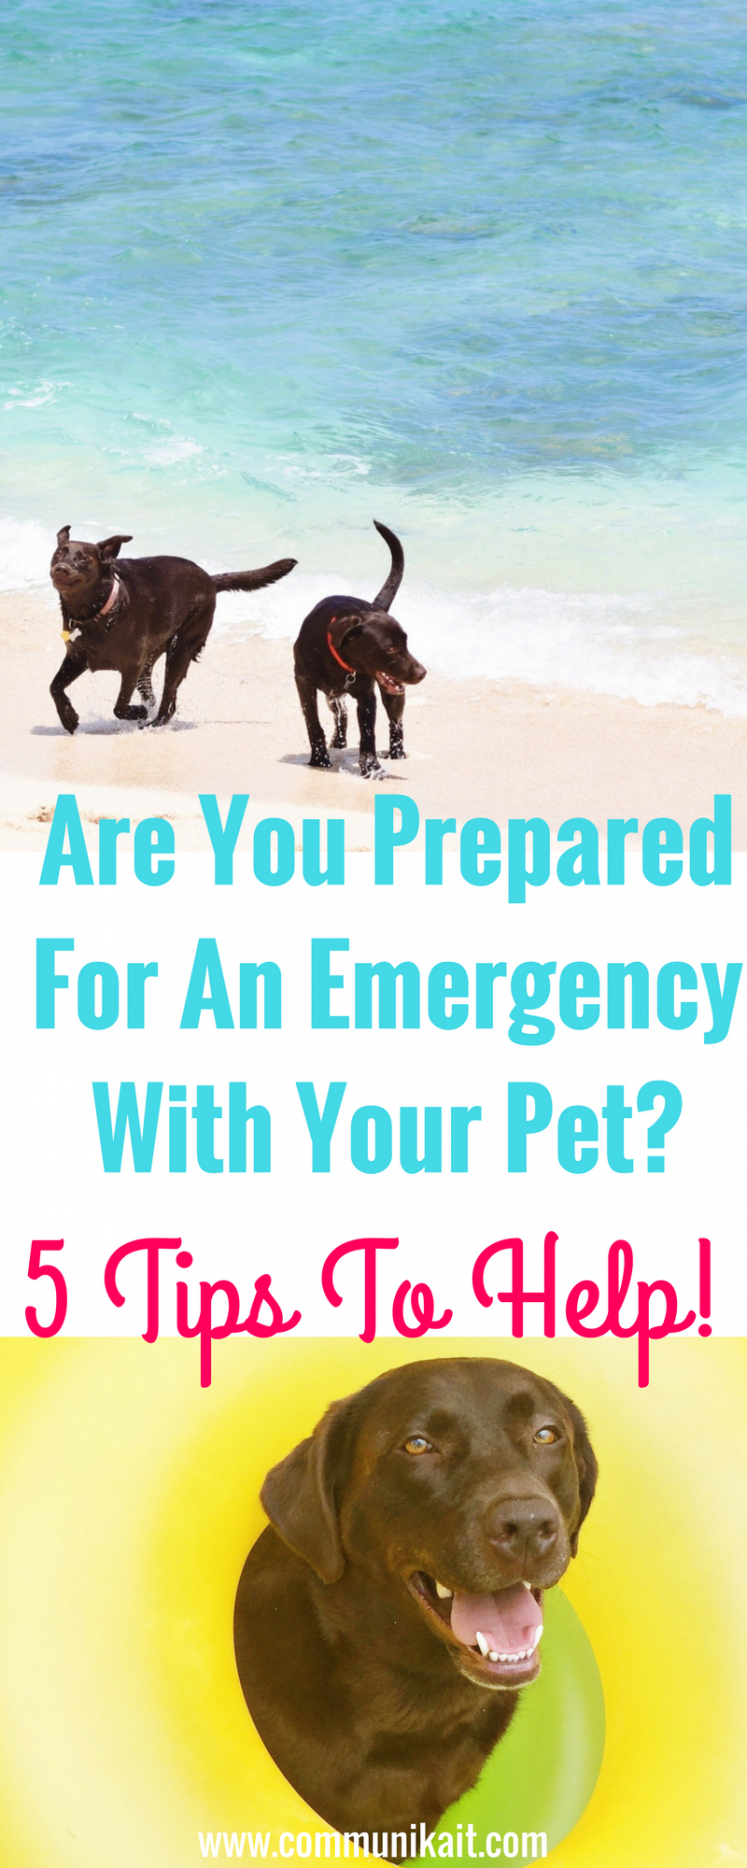 Are You Prepared For An Emergency With Your Pet?